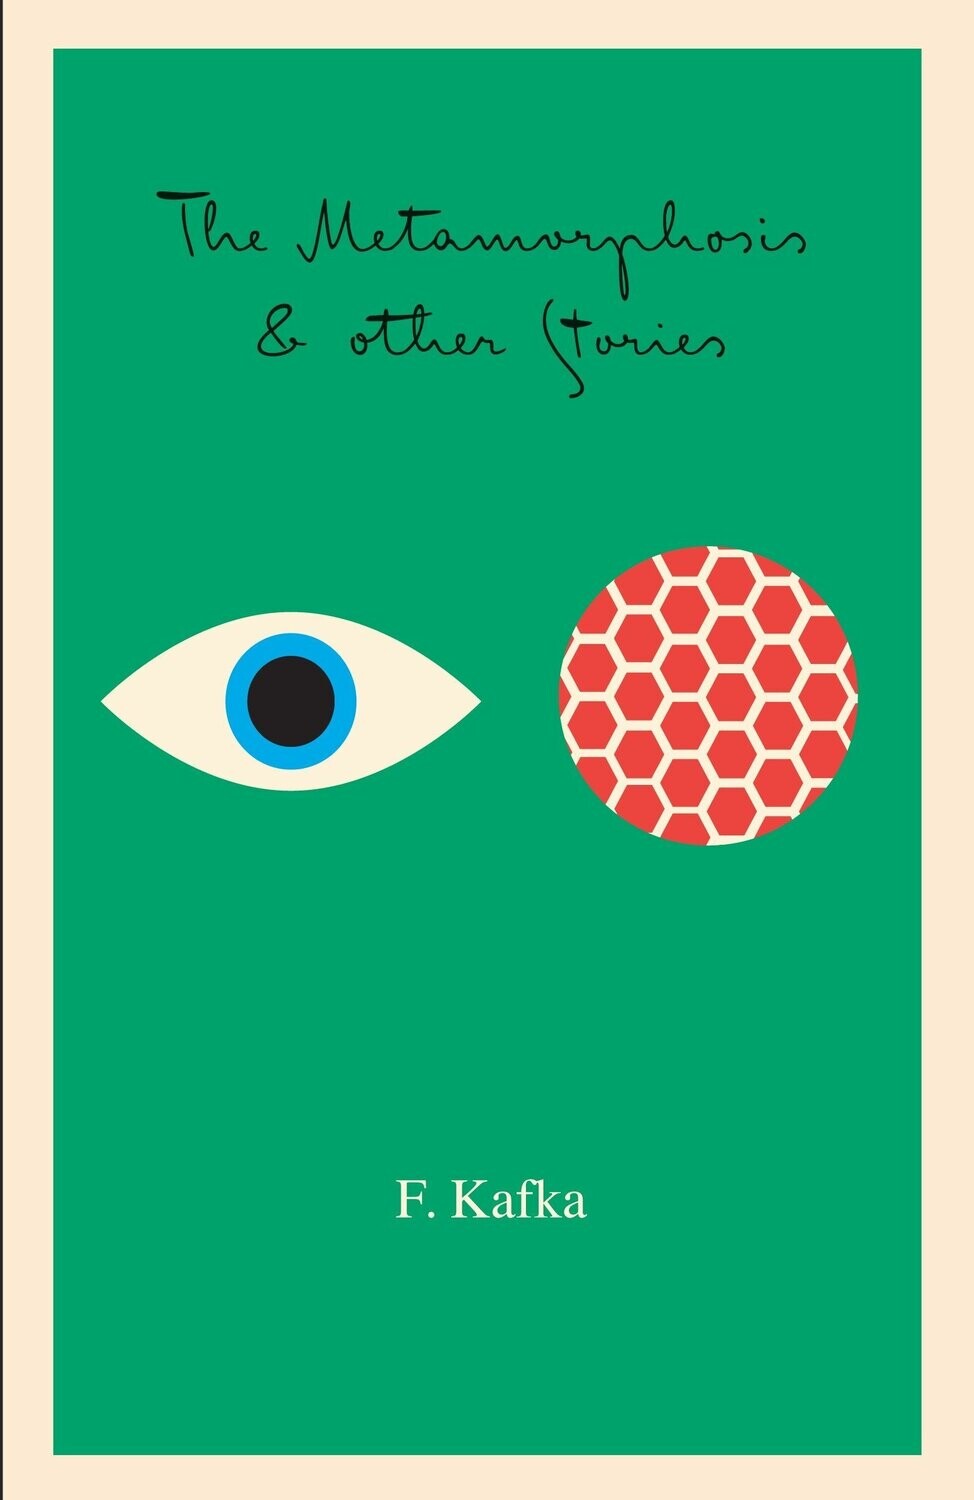 The Metamorphosis: And Other Stories by Franz Kafka (Penguin Classics)